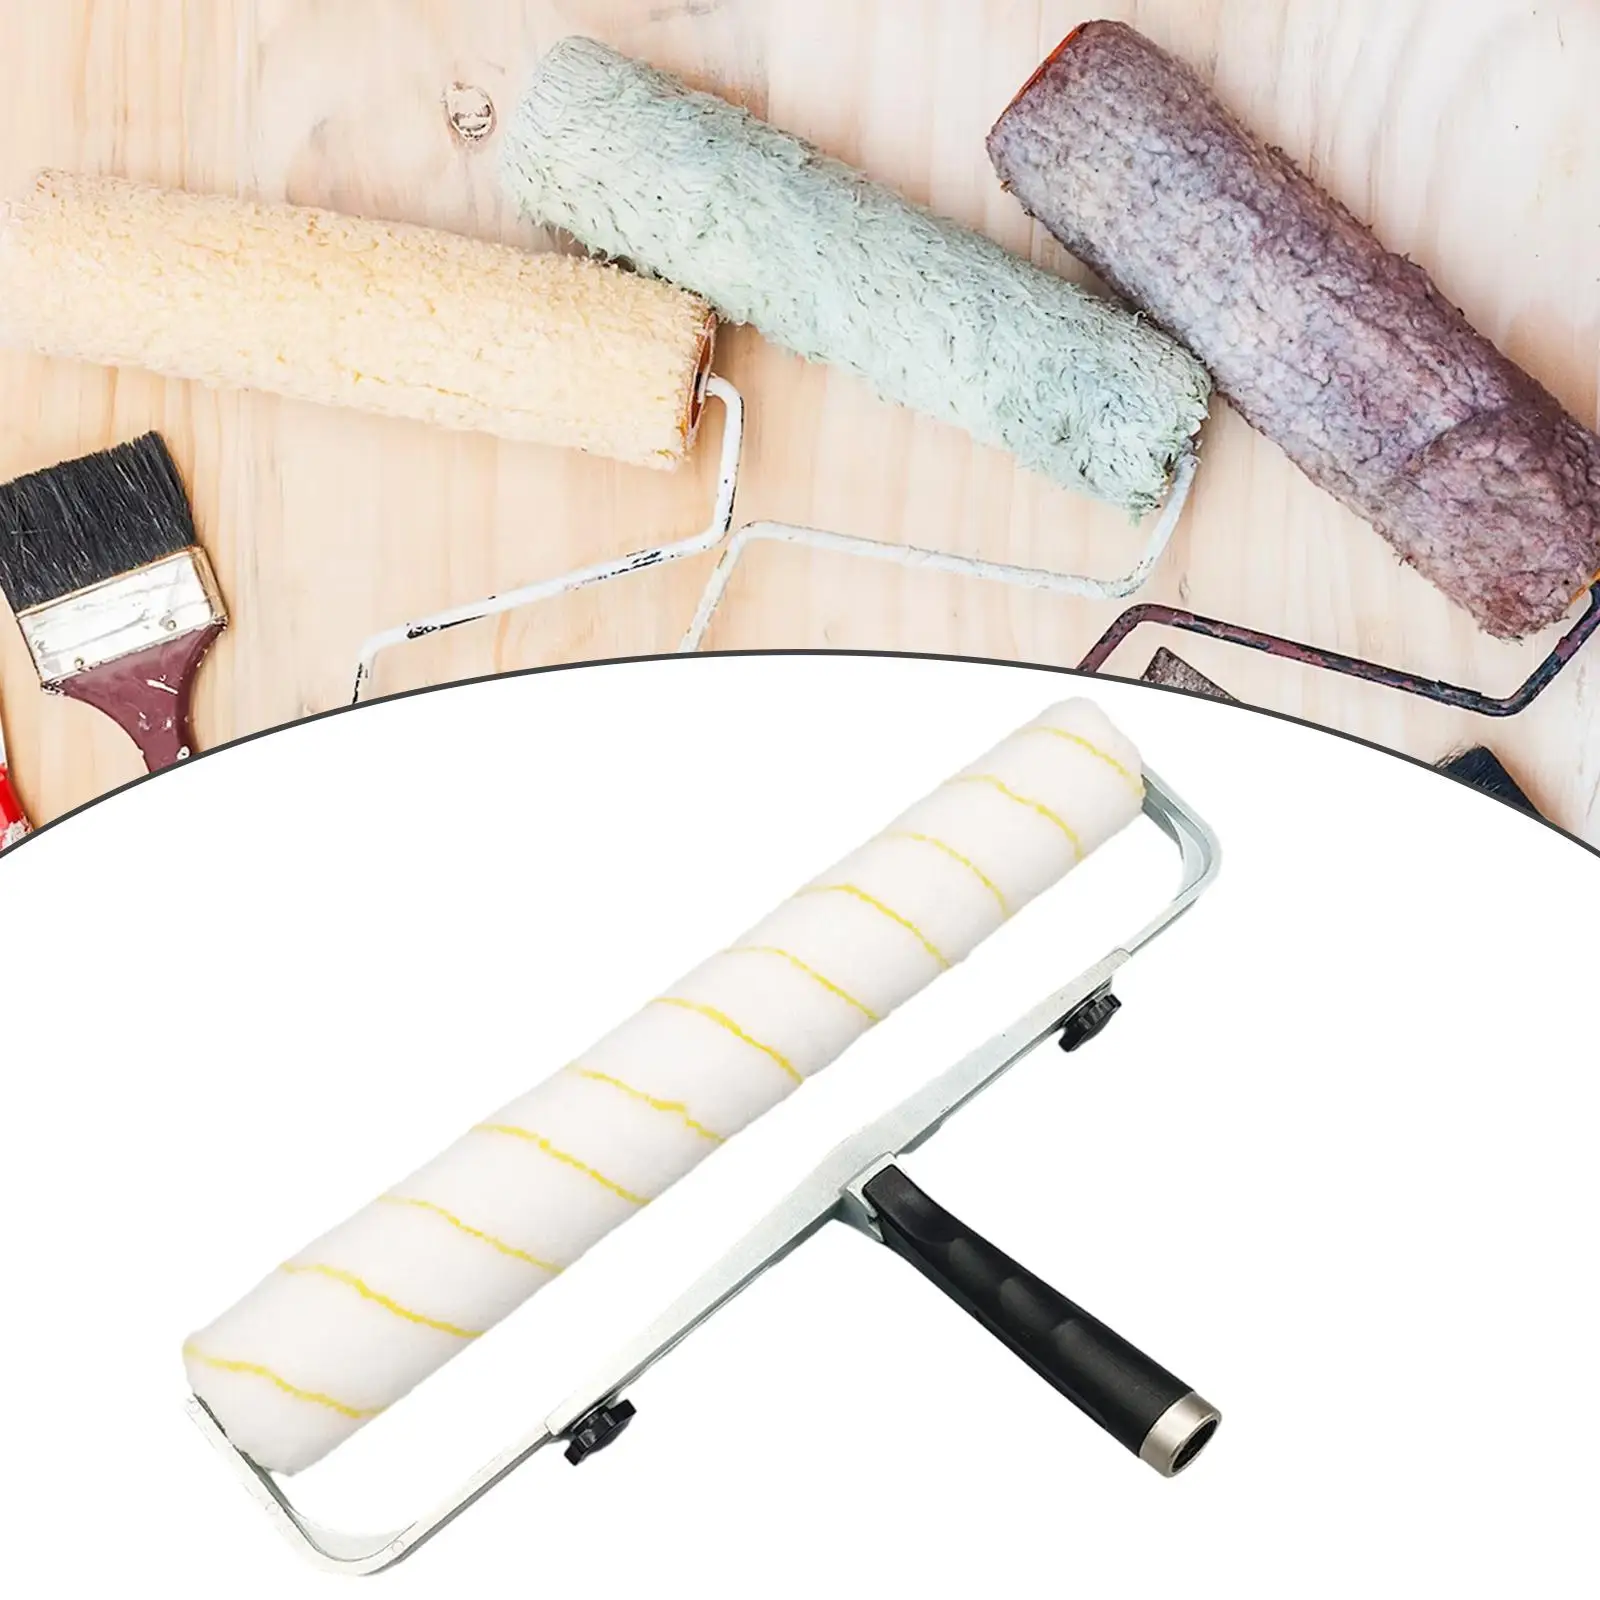 45cm Paint Roller with Roller Frame Accessory for Painting Walls and House